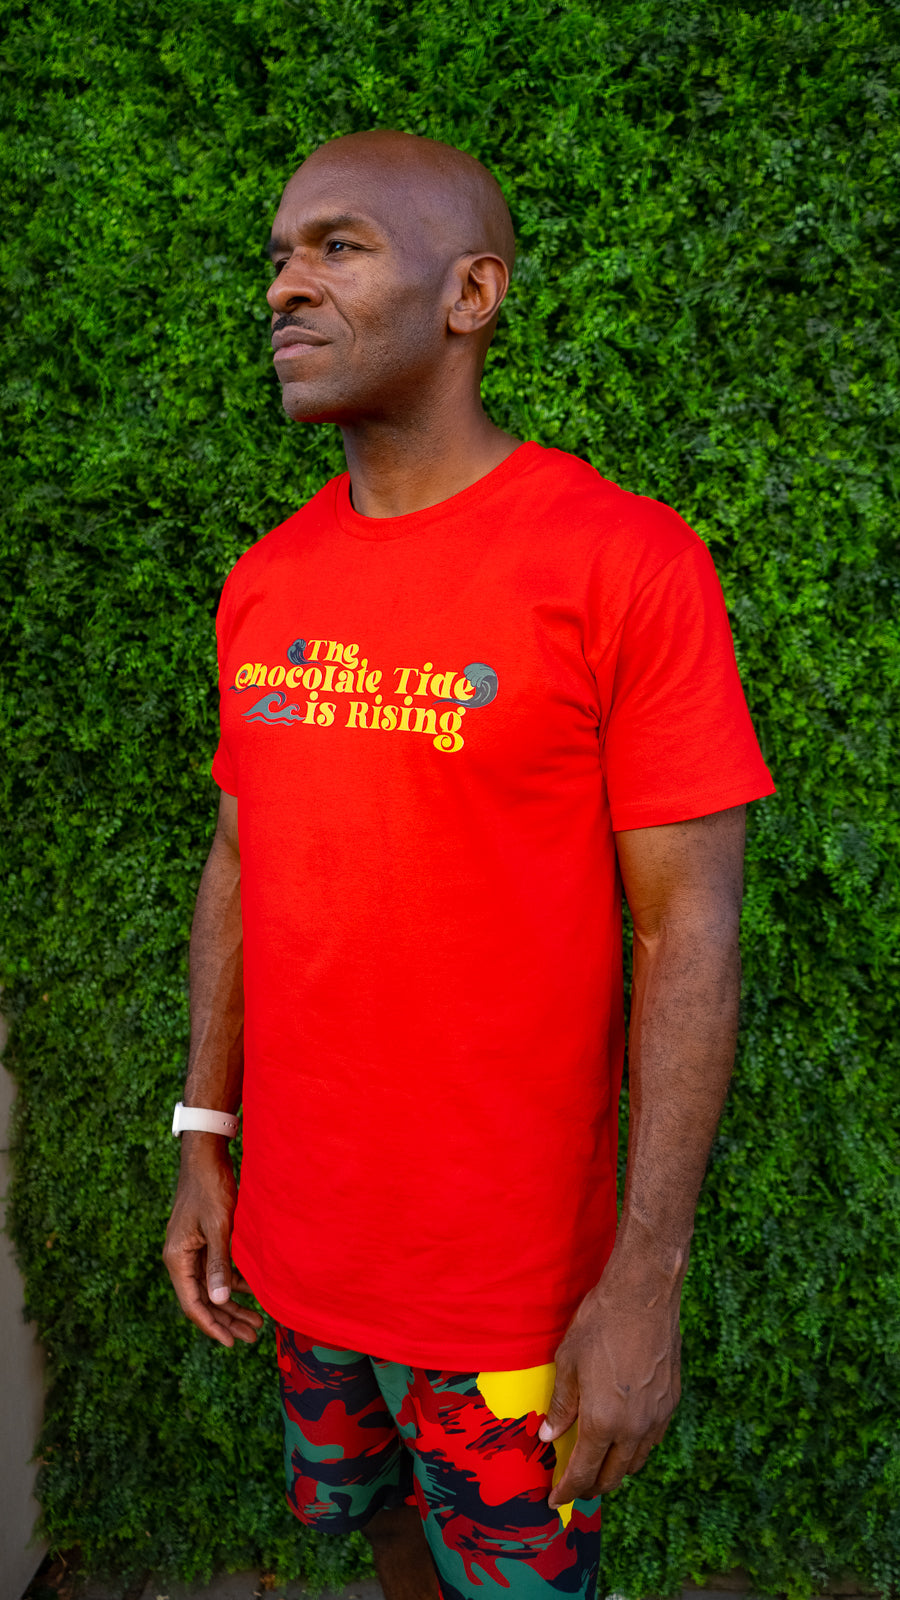 The Chocolate Tide is Rising T-Shirt Dogwood Boys